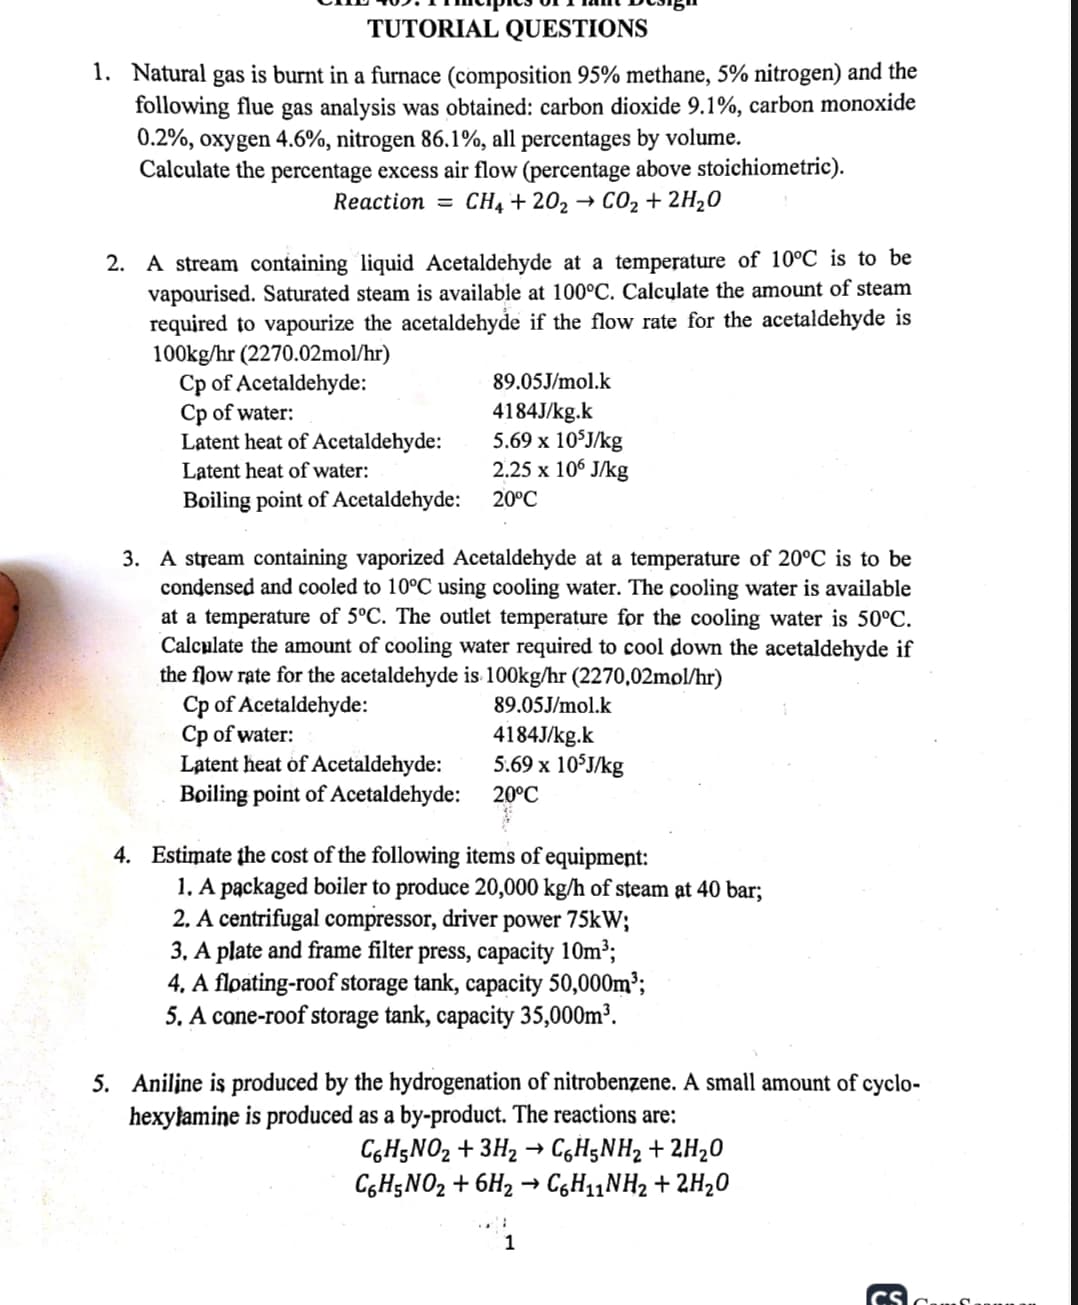 TUTORIAL QUESTIONS
1. Natural gas is burnt in a furnace (composition 95% methane, 5% nitrogen) and the
following flue gas analysis was obtained: carbon dioxide 9.1%, carbon monoxide
0.2%, oxygen 4.6%, nitrogen 86.1%, all percentages by volume.
Calculate the percentage excess air flow (percentage above stoichiometric).
Reaction = CH4 +20₂ → CO₂ + 2H₂O
2. A stream containing liquid Acetaldehyde at a temperature of 10°C is to be
vapourised. Saturated steam is available at 100°C. Calculate the amount of steam
required to vapourize the acetaldehyde if the flow rate for the acetaldehyde is
100kg/hr (2270.02mol/hr)
Cp of Acetaldehyde:
Cp of water:
Latent heat of Acetaldehyde:
Latent heat of water:
Boiling point of Acetaldehyde:
89.05J/mol.k
4184J/kg.k
5.69 x 105J/kg
2.25 x 106 J/kg
20°C
3. A stream containing vaporized Acetaldehyde at a temperature of 20°C is to be
condensed and cooled to 10°C using cooling water. The cooling water is available
at a temperature of 5°C. The outlet temperature for the cooling water is 50°C.
Calculate the amount of cooling water required to cool down the acetaldehyde if
the flow rate for the acetaldehyde is 100kg/hr (2270,02mol/hr)
Cp of Acetaldehyde:
Cp of water:
Latent heat of Acetaldehyde:
Boiling point of Acetaldehyde:
89.05J/mol.k
4184J/kg.k
5.69 x 105J/kg
20°C
4. Estimate the cost of the following items of equipment:
1. A packaged boiler to produce 20,000 kg/h of steam at 40 bar;
2. A centrifugal compressor, driver power 75kW;
3. A plate and frame filter press, capacity 10m³;
4. A floating-roof storage tank, capacity 50,000m³;
5. A cone-roof storage tank, capacity 35,000m³.
5. Aniline is produced by the hydrogenation of nitrobenzene. A small amount of cyclo-
hexylamine is produced as a by-product. The reactions are:
C6H5NO₂ + 3H₂ → C6H5NH₂ + 2H₂O
C6H5NO₂ + 6H₂ → C6H₁1NH₂ + 2H₂O
1